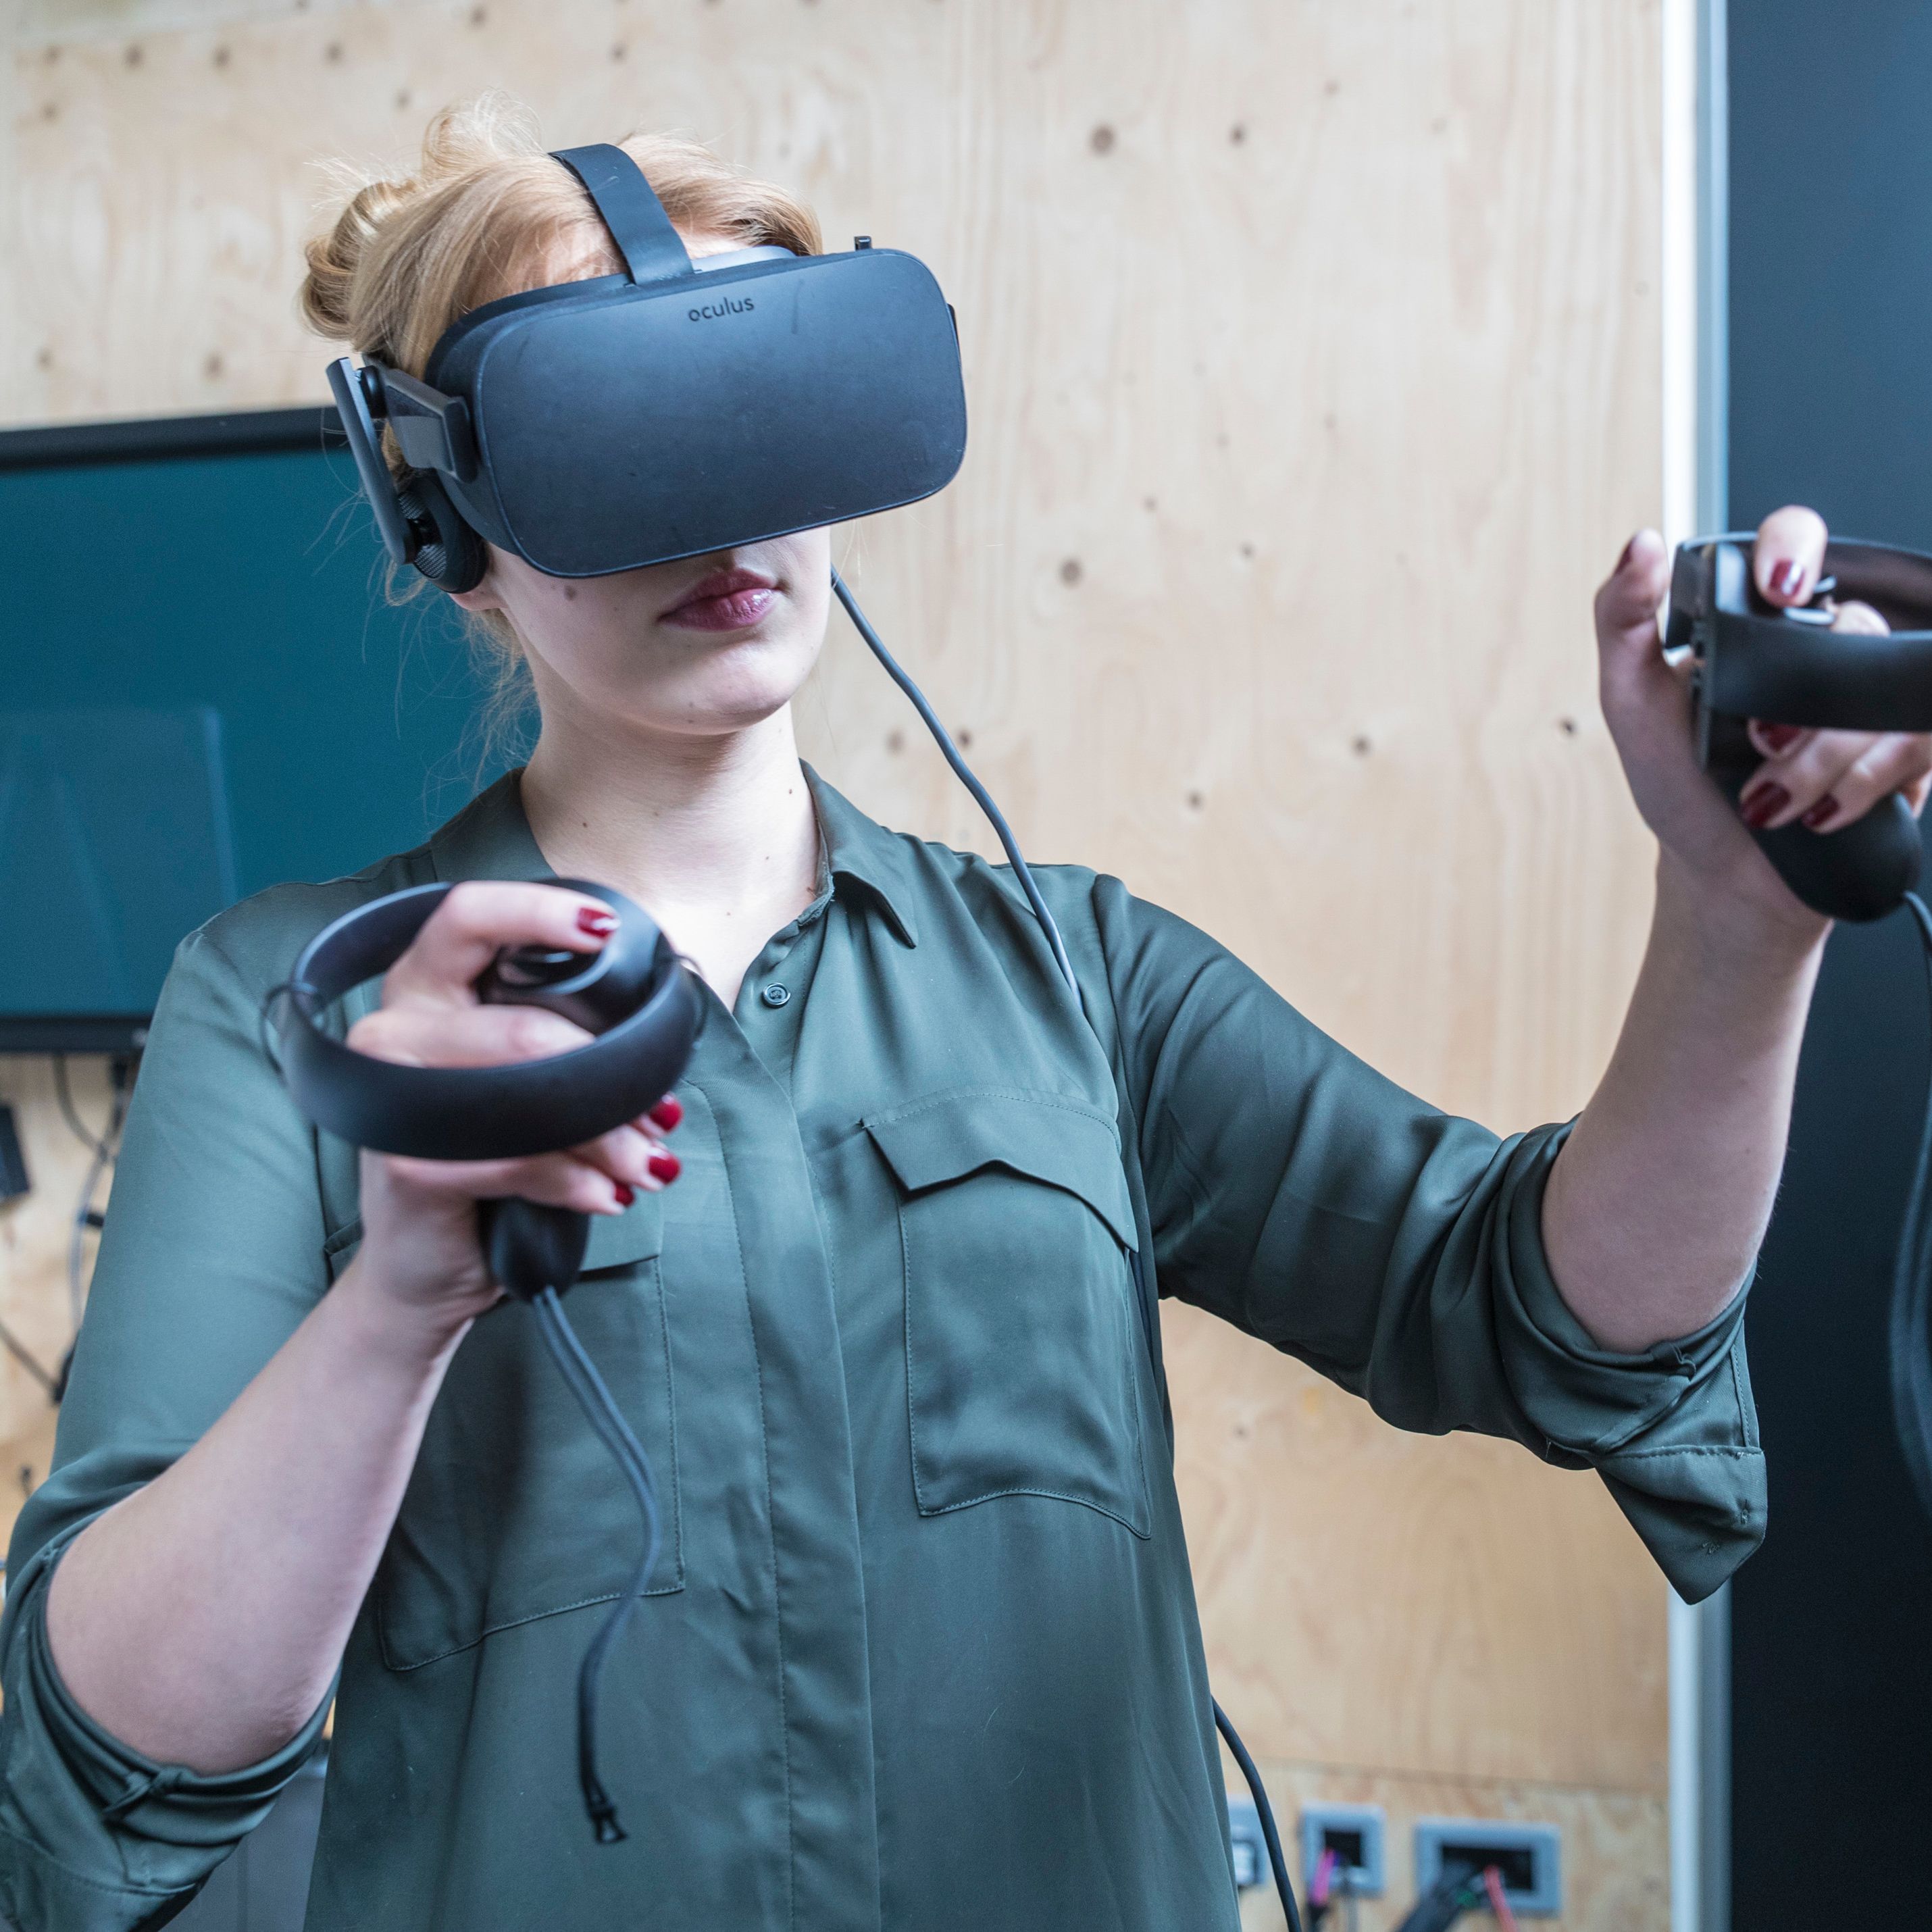 A person using a VR headset and controls